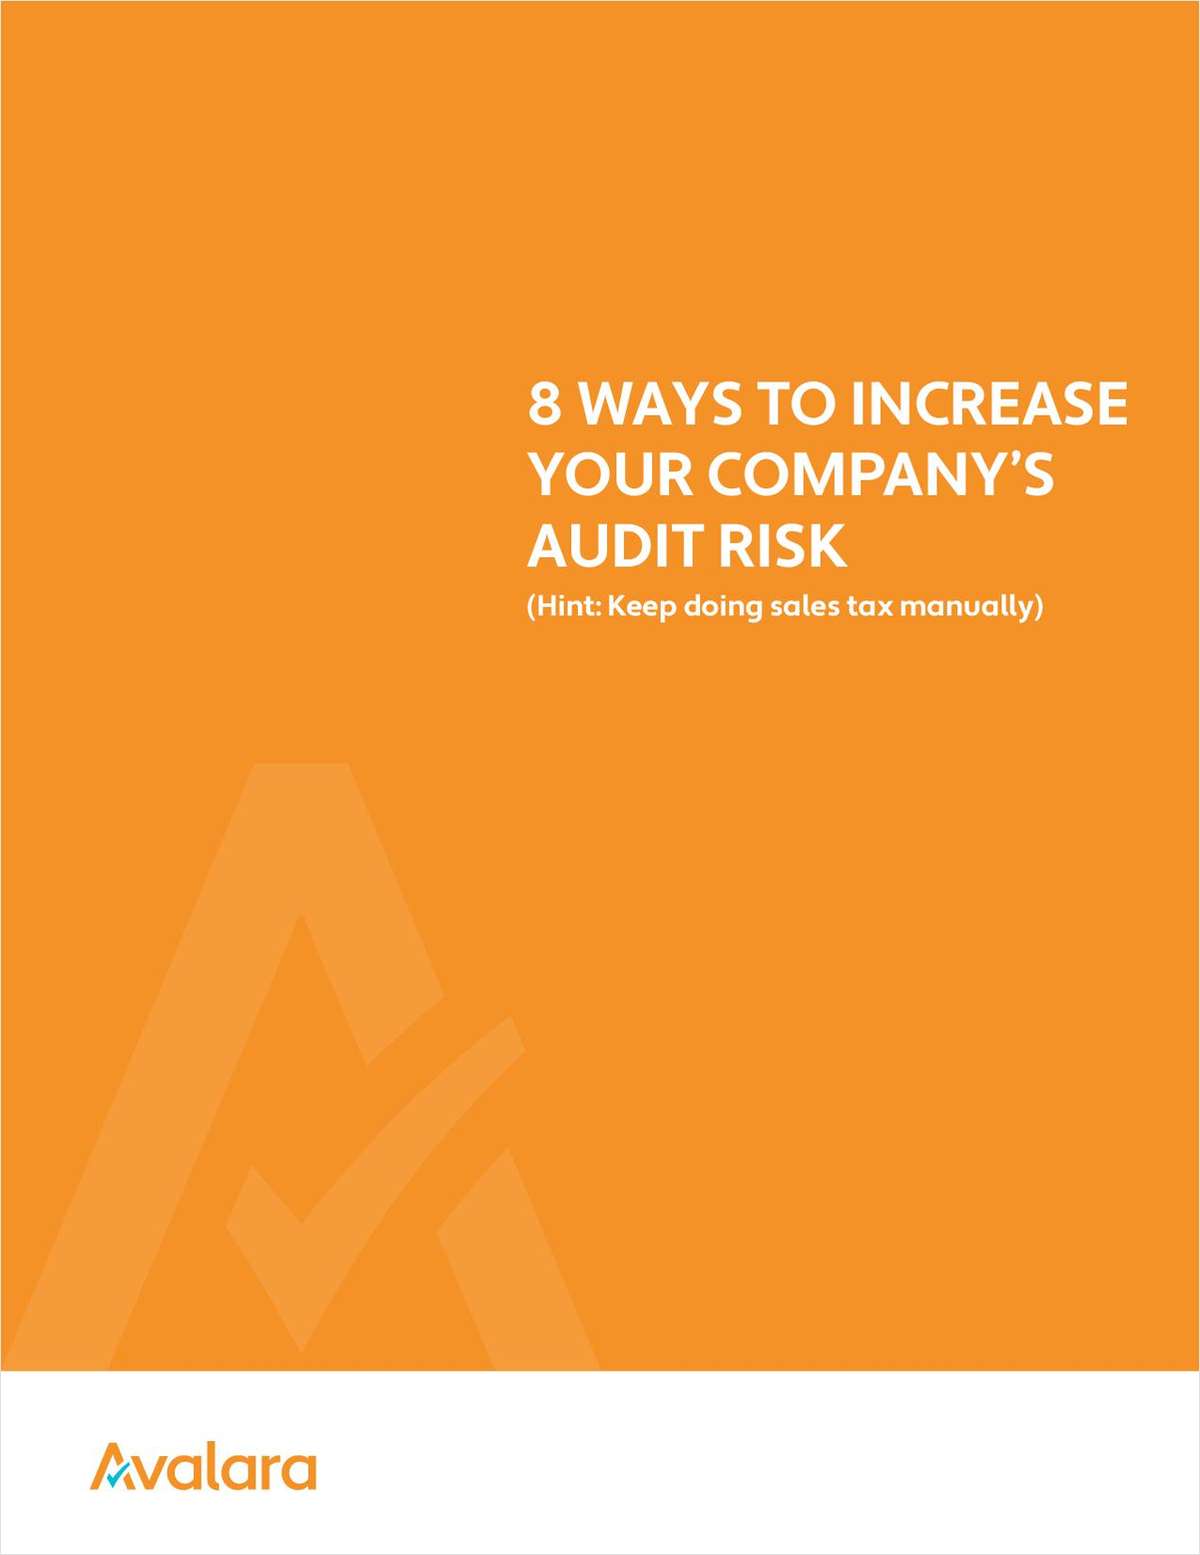 8 Ways to Increase Your Company's Audit Risk.  (Hint: Keep Doing Sales Tax Manually)